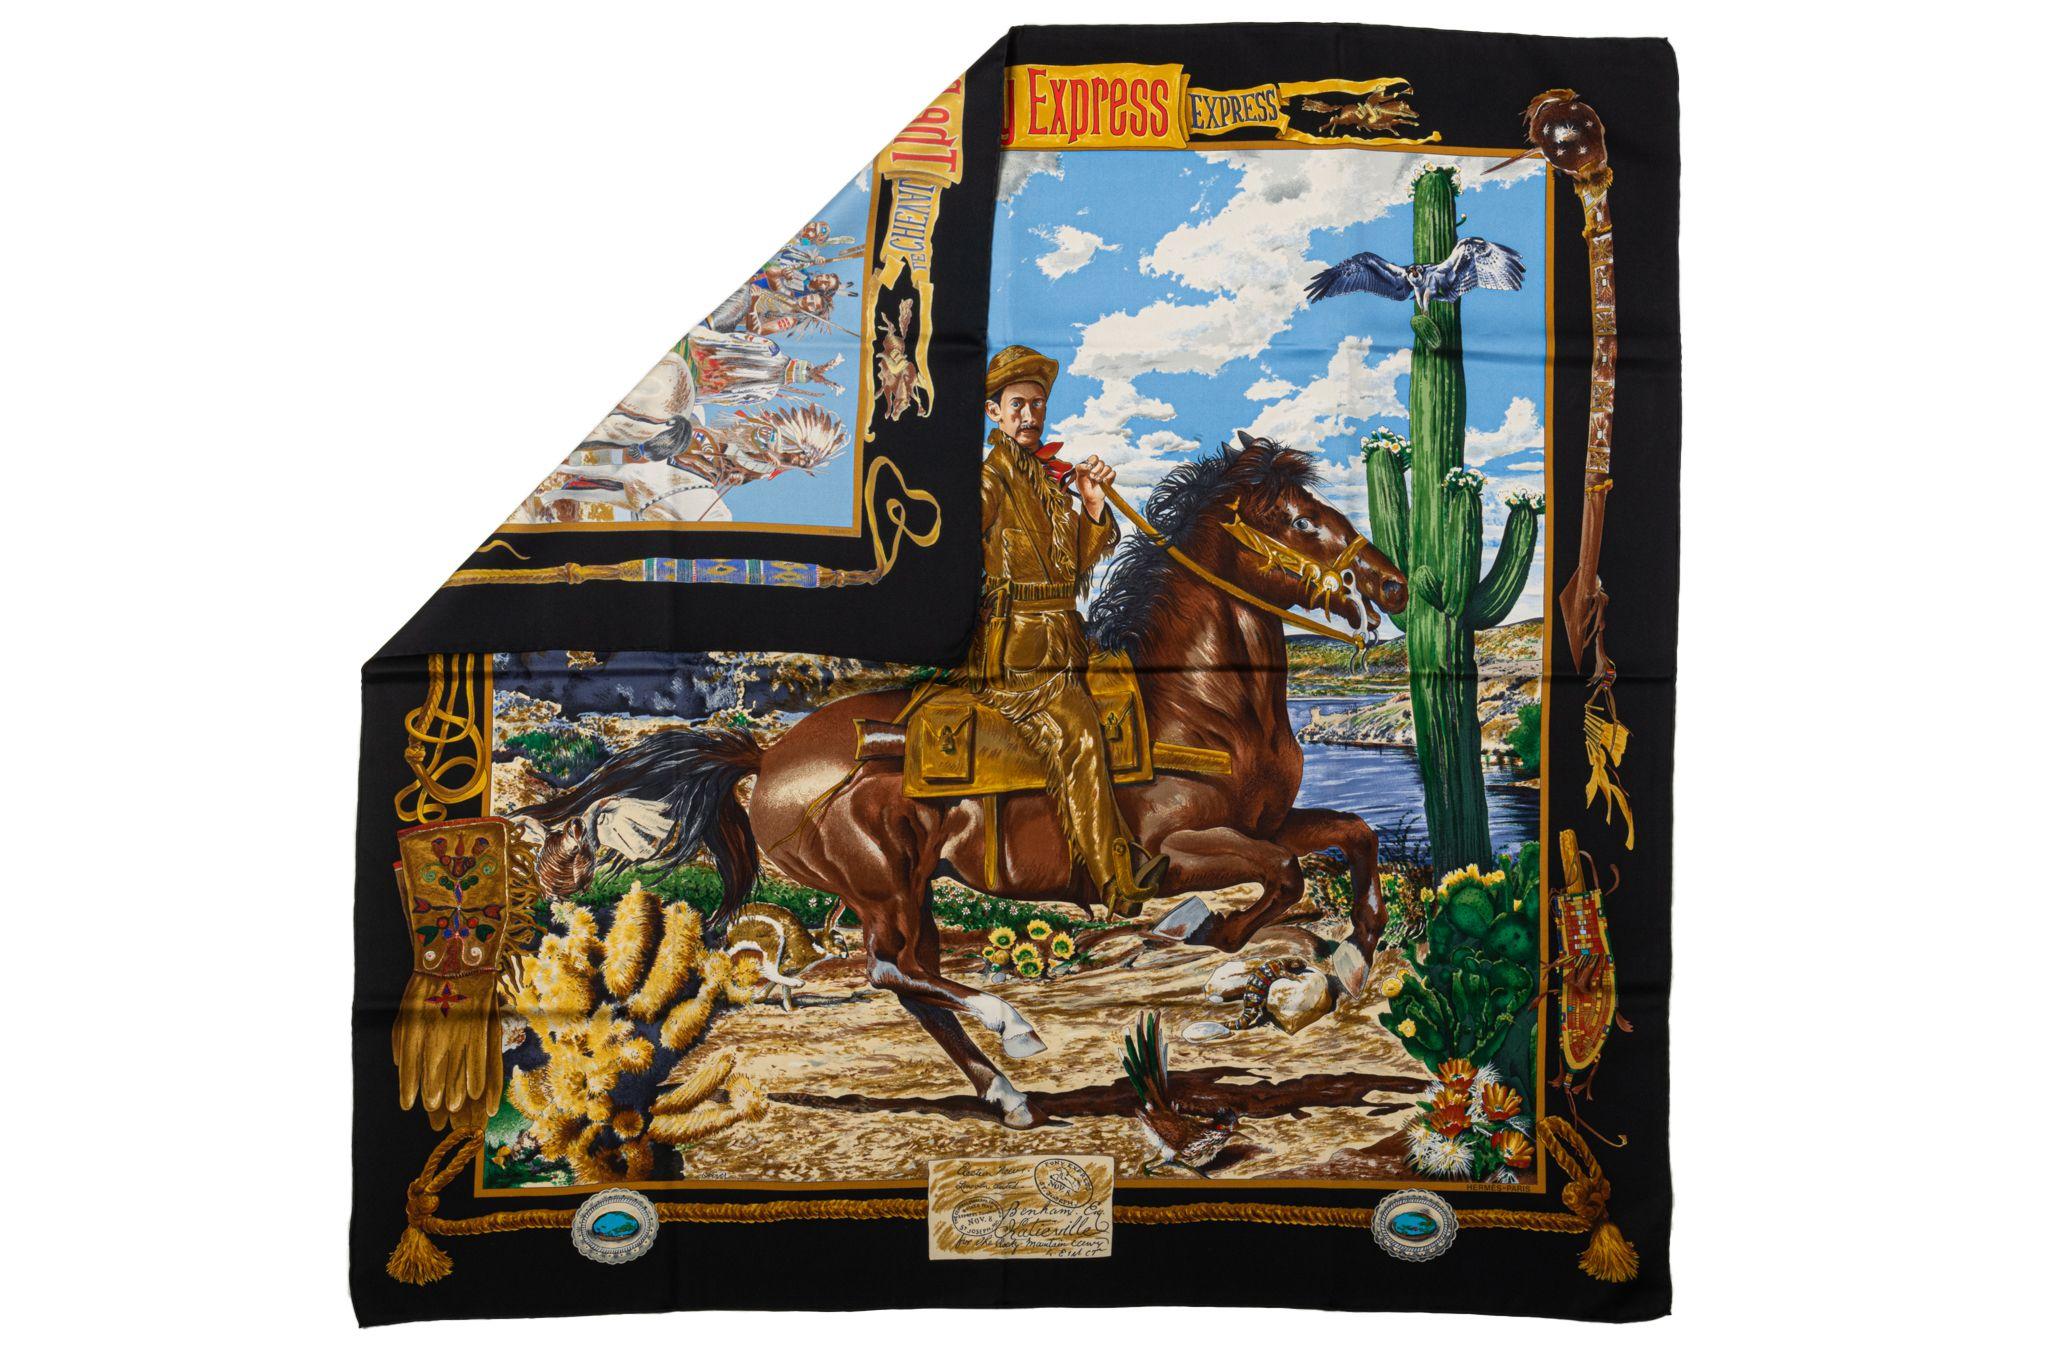 Hermes collectible black Pony Express silk scarf, designed by Kermit Oliver. Care tag attached, original box included.